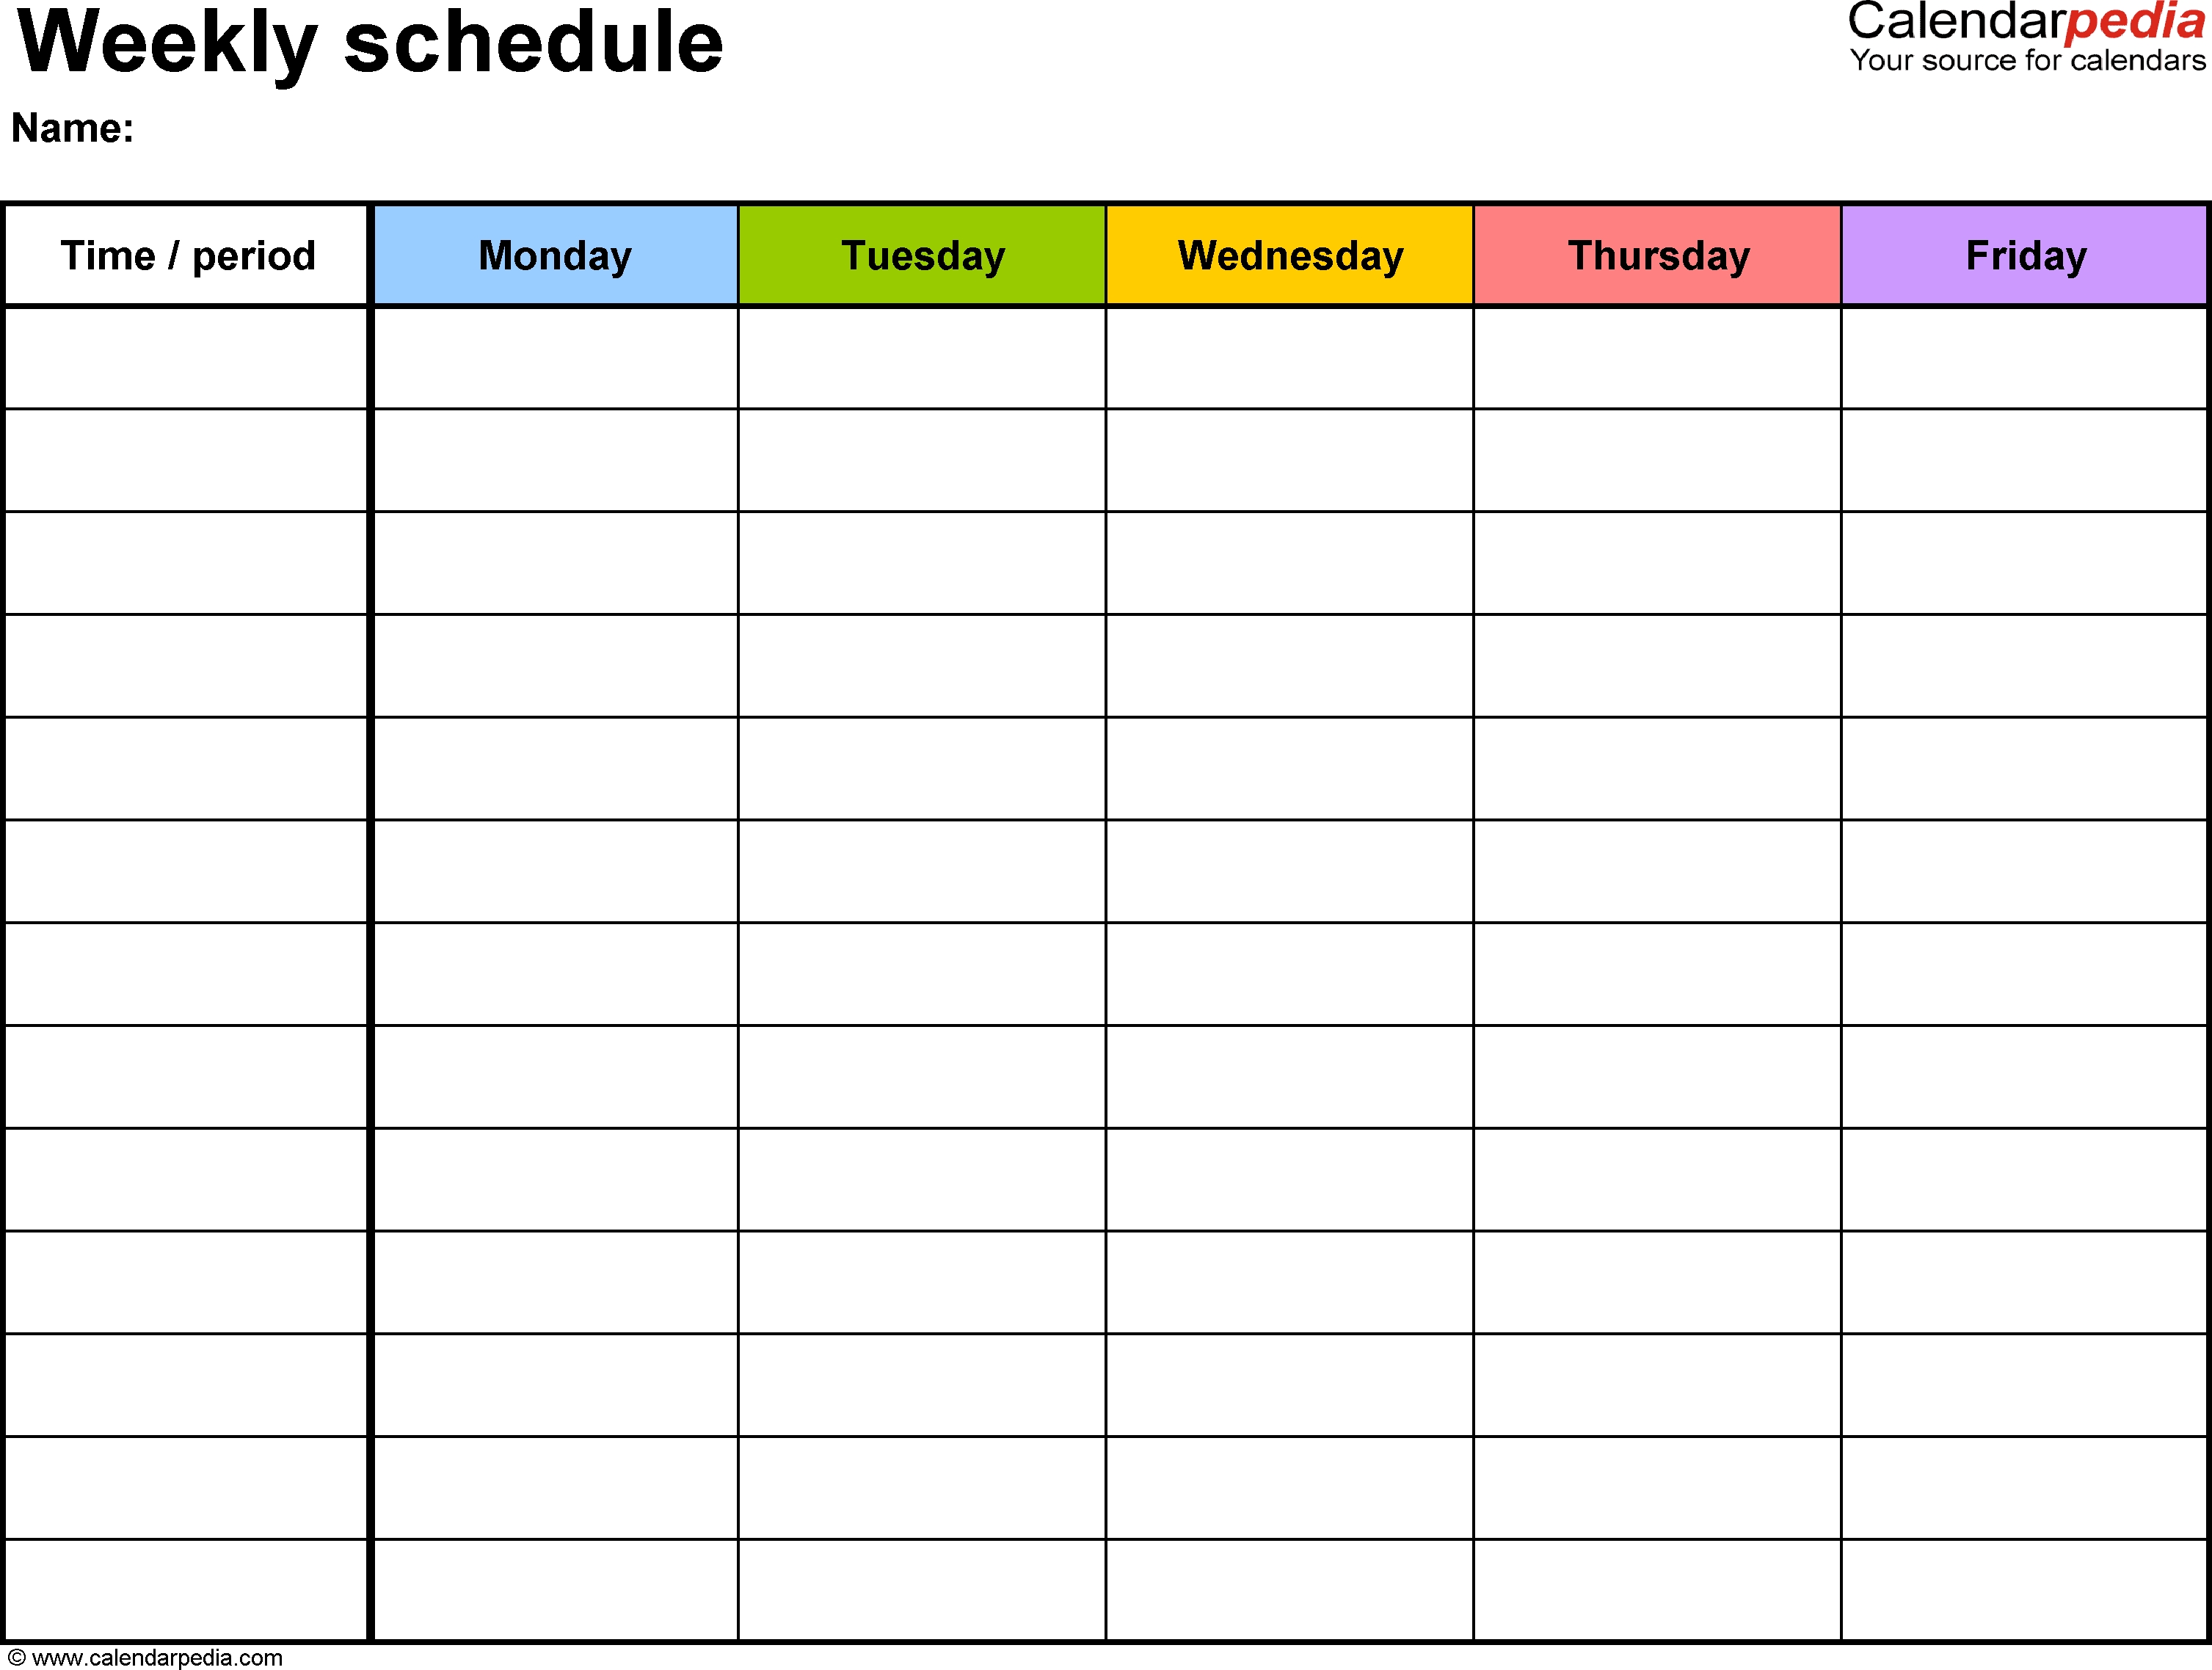 Free Weekly Schedule Templates For Word - 18 Templates-Blank Monday Through Friday Schedule